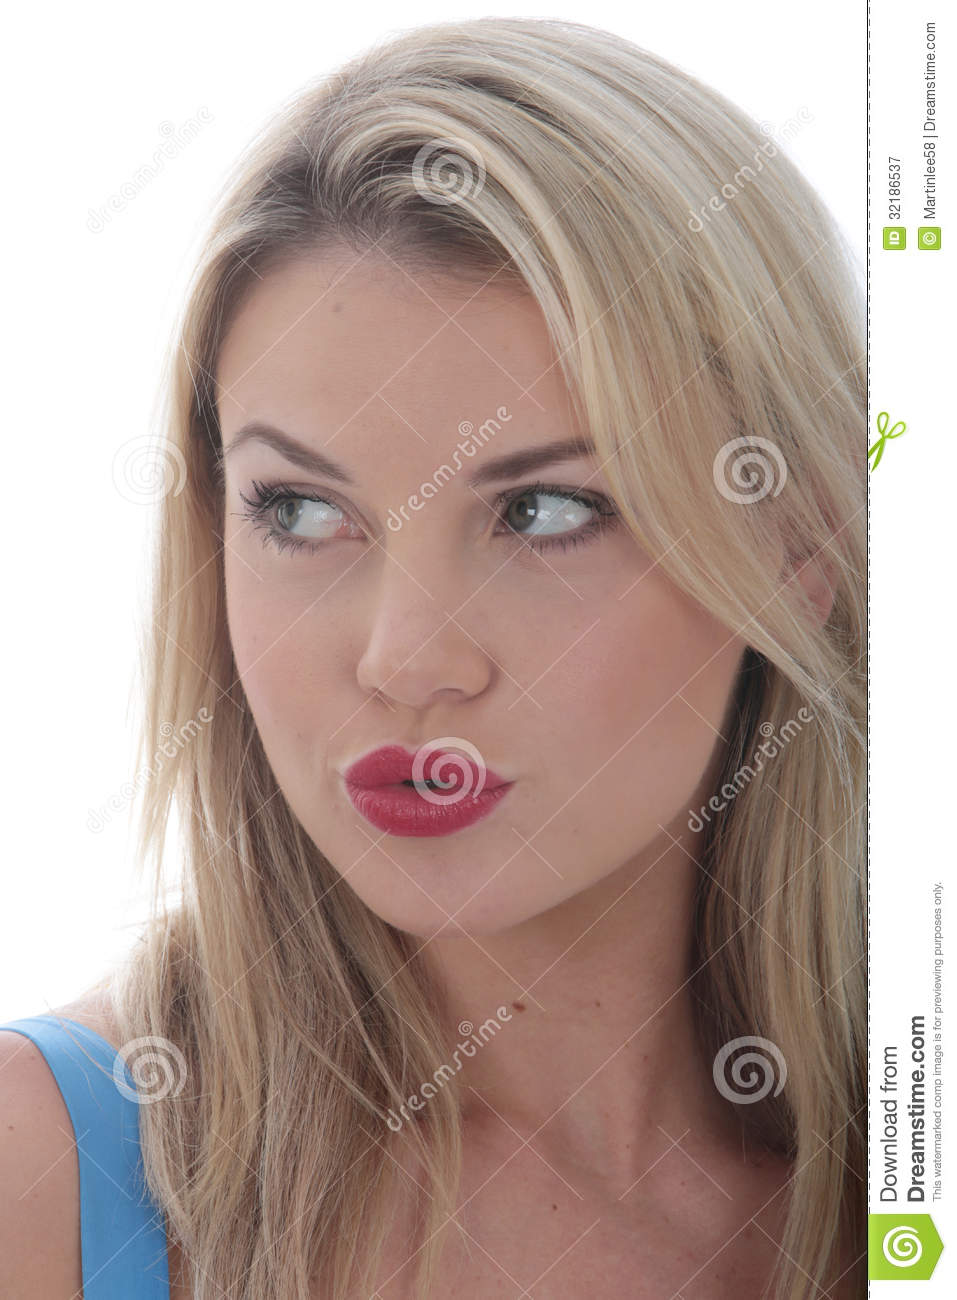 Attractive Young Woman Pursed Lips Royalty Free Stock Photography